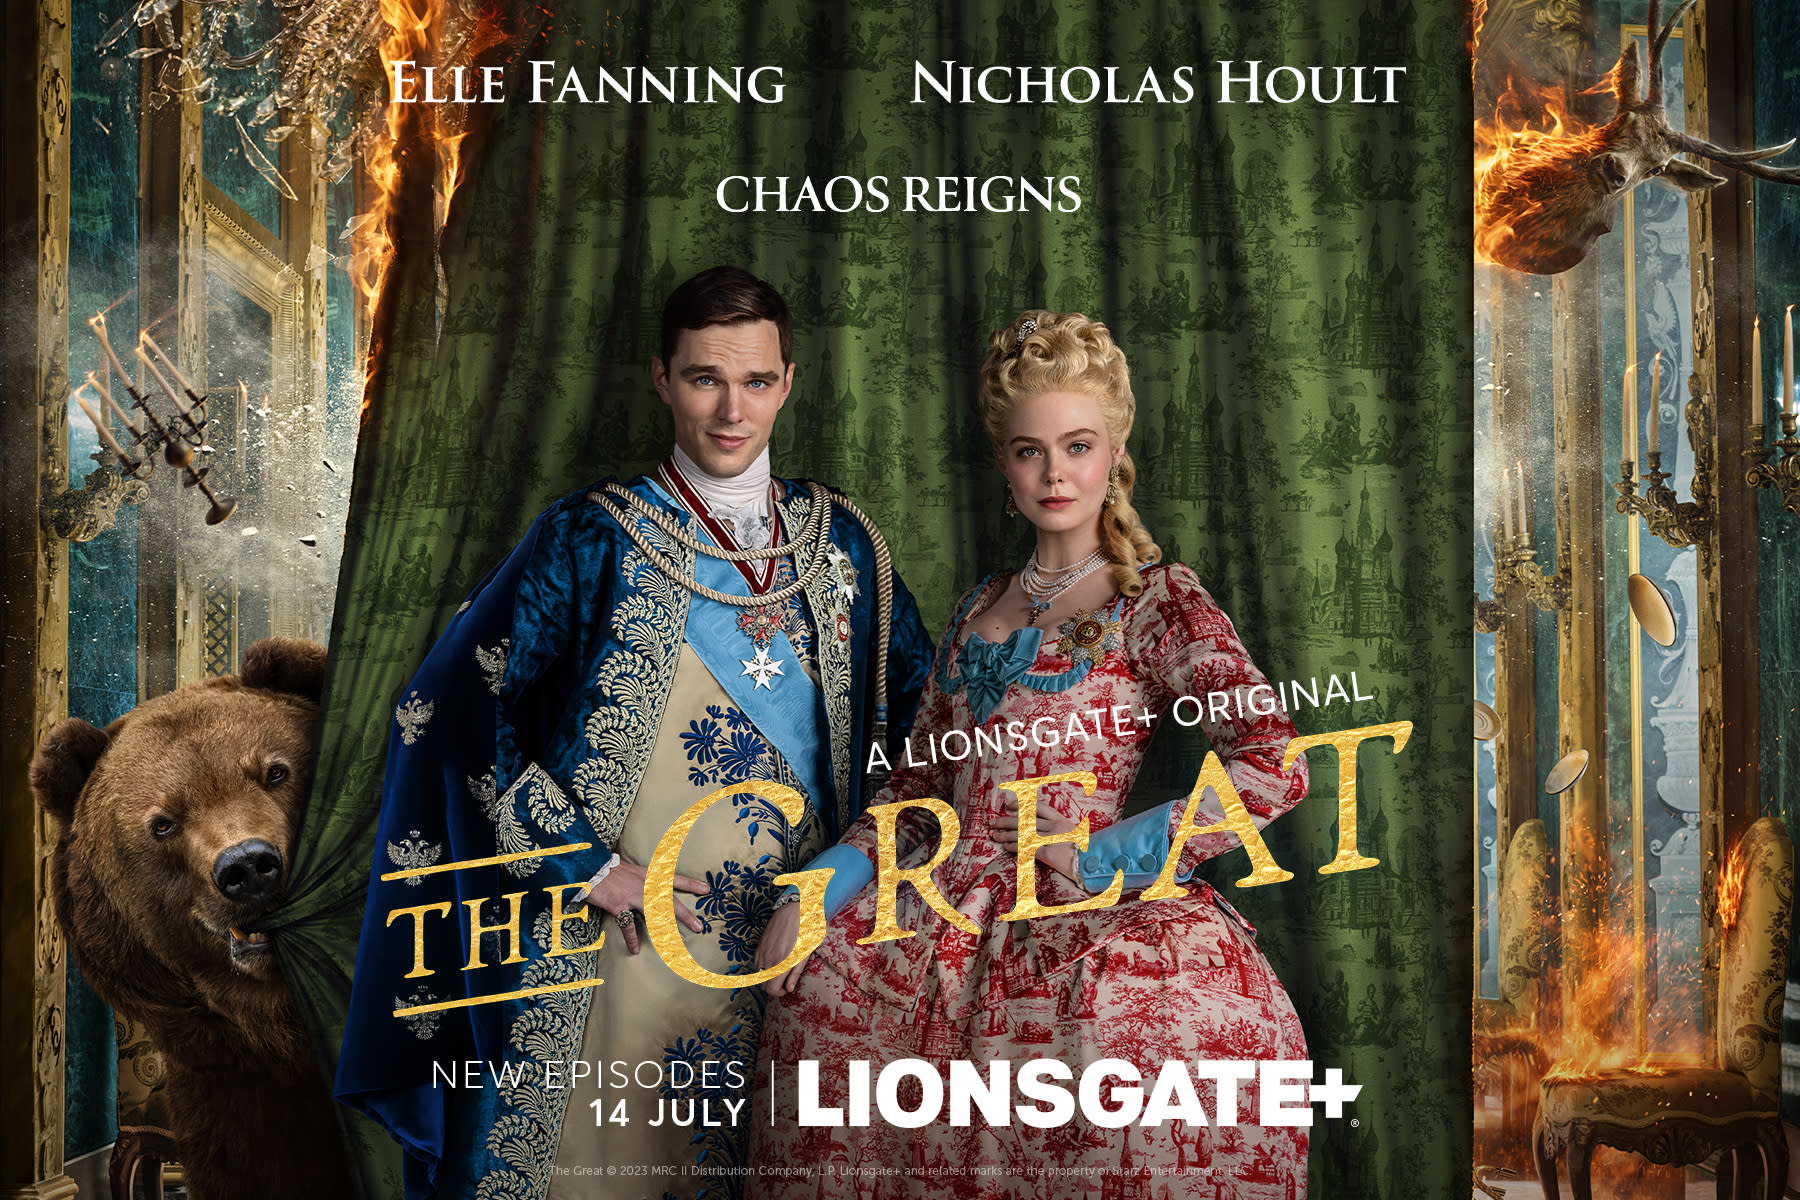 Nicholas Hoult and Elle Fanning star in The Great. (Lionsgate+)